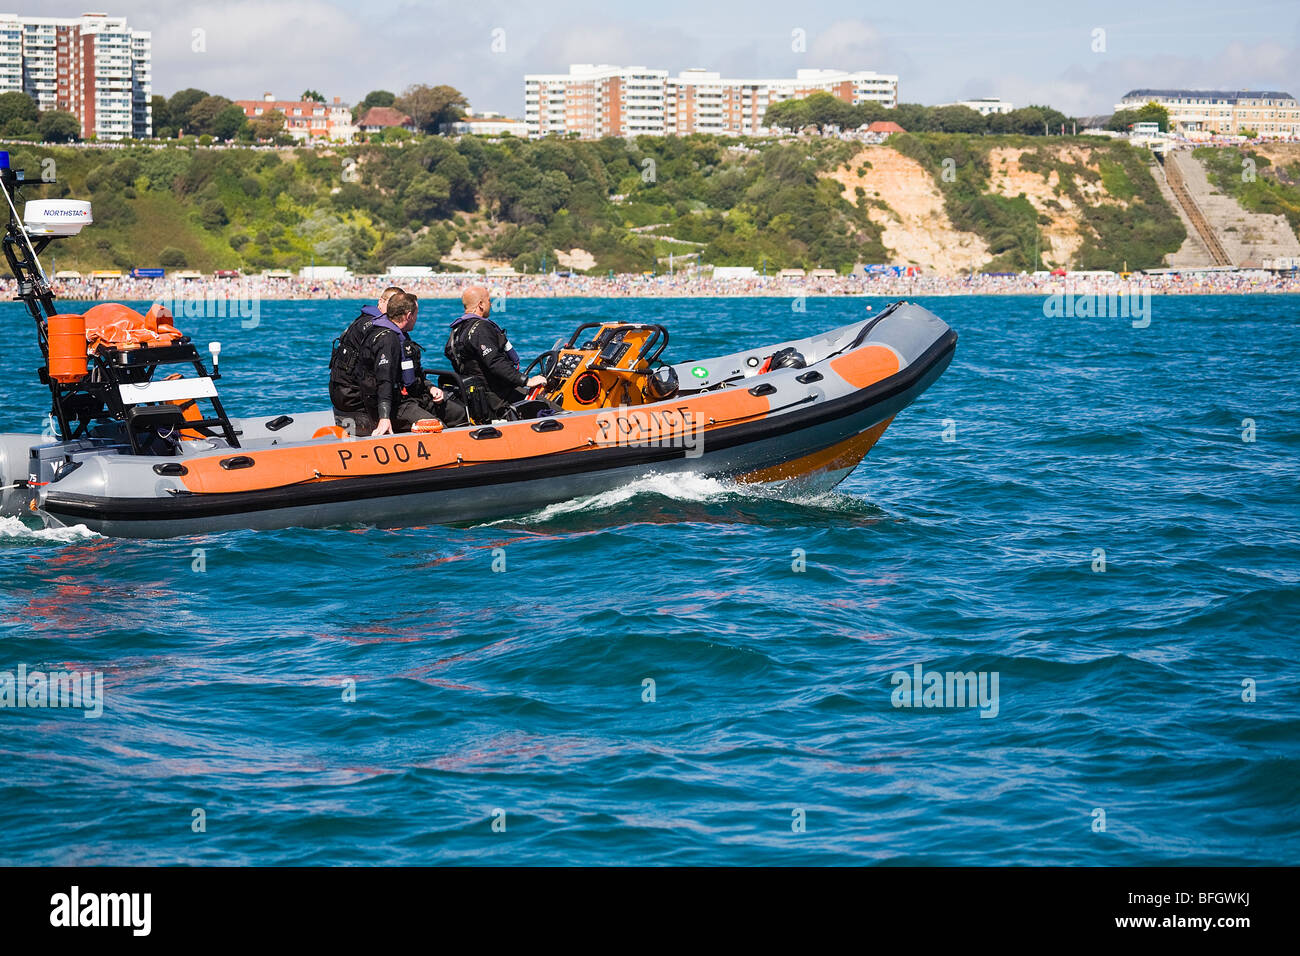 Officers from the Dorset Police Marine Section, patrol off shore along Bournemouth beach and seafront, Dorset. UK. Summer. Stock Photo